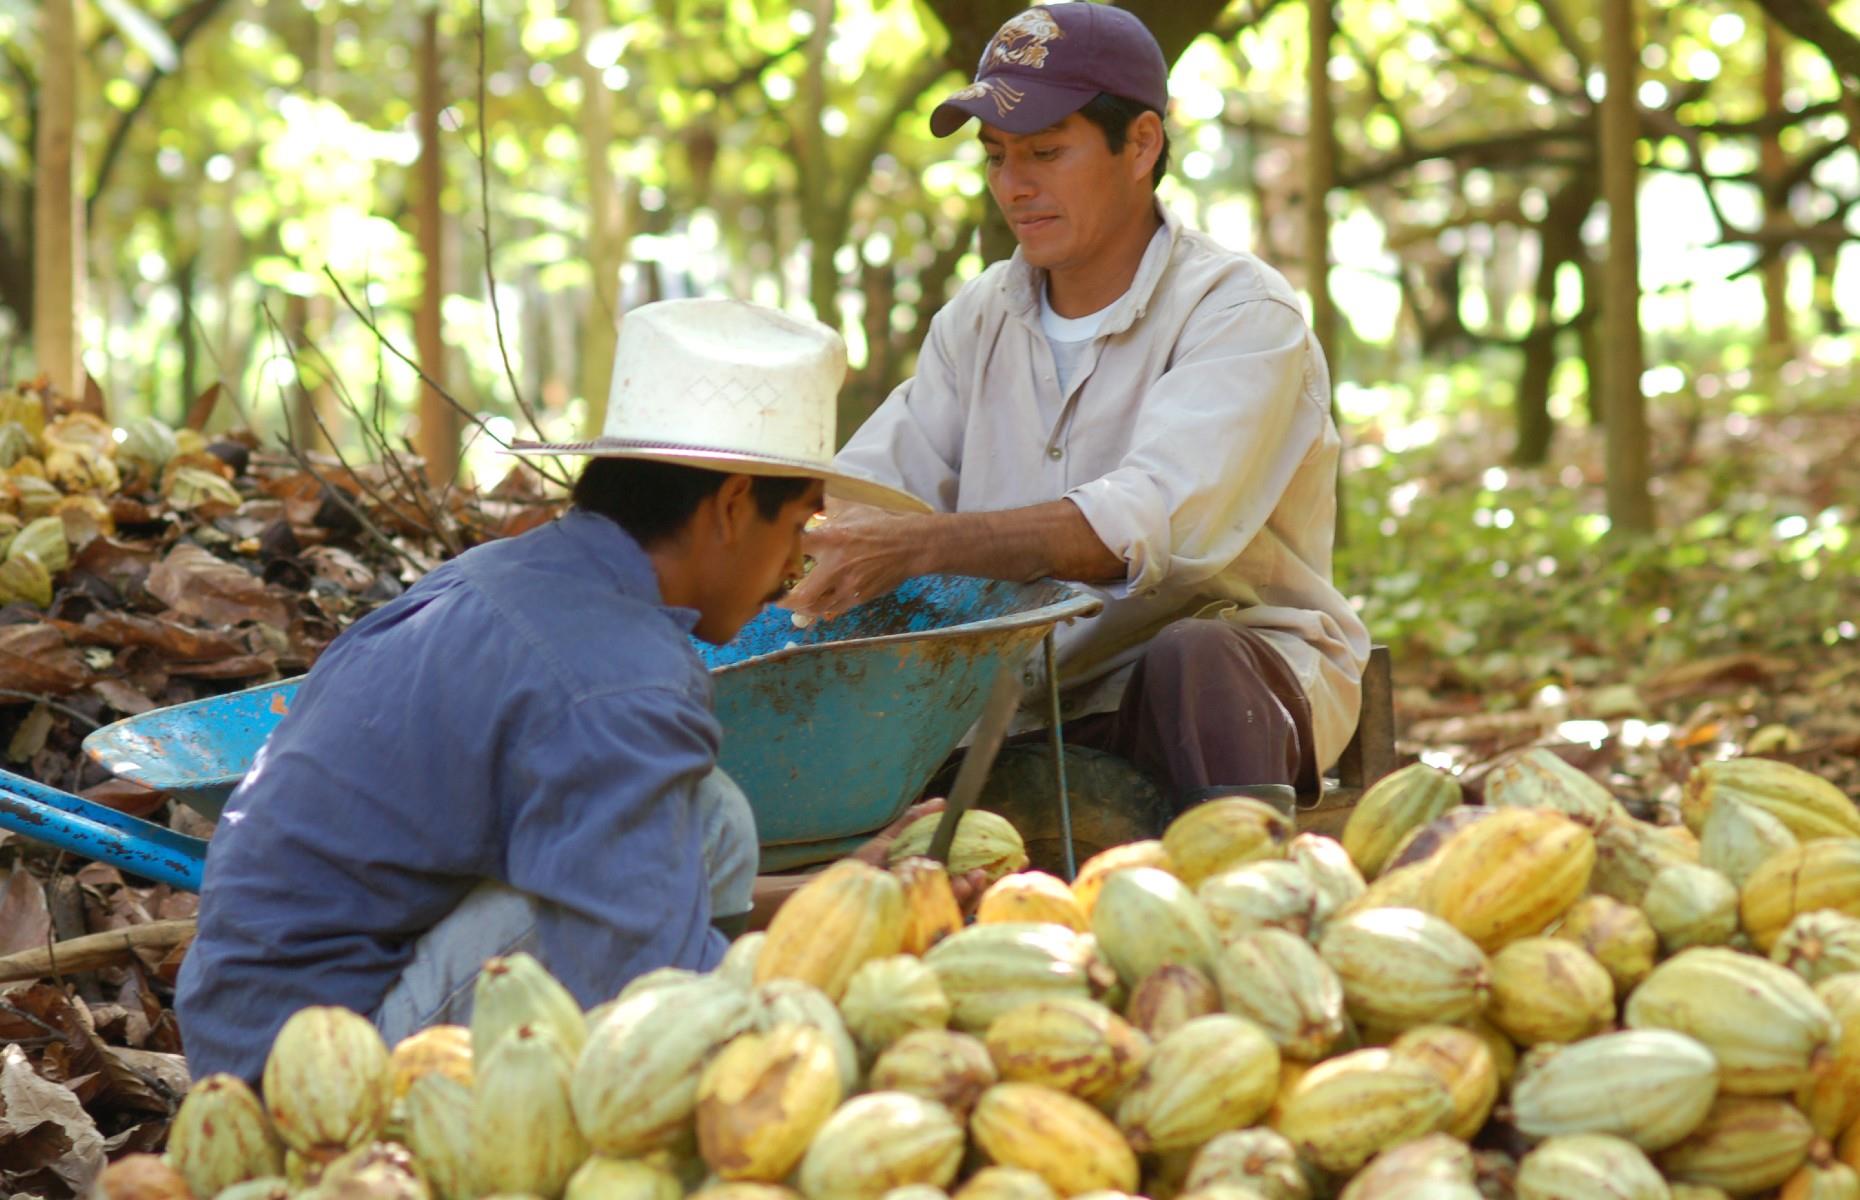 <p>In recent decades, consumers have become much more aware of how farming cocoa can impact the environment. Vast plantations and mass farming have led to almost irreversible levels of deforestation in certain parts of the world. Now, brands are facing increasing pressure to source ingredients sustainably, with a new sector of ethical products.</p>